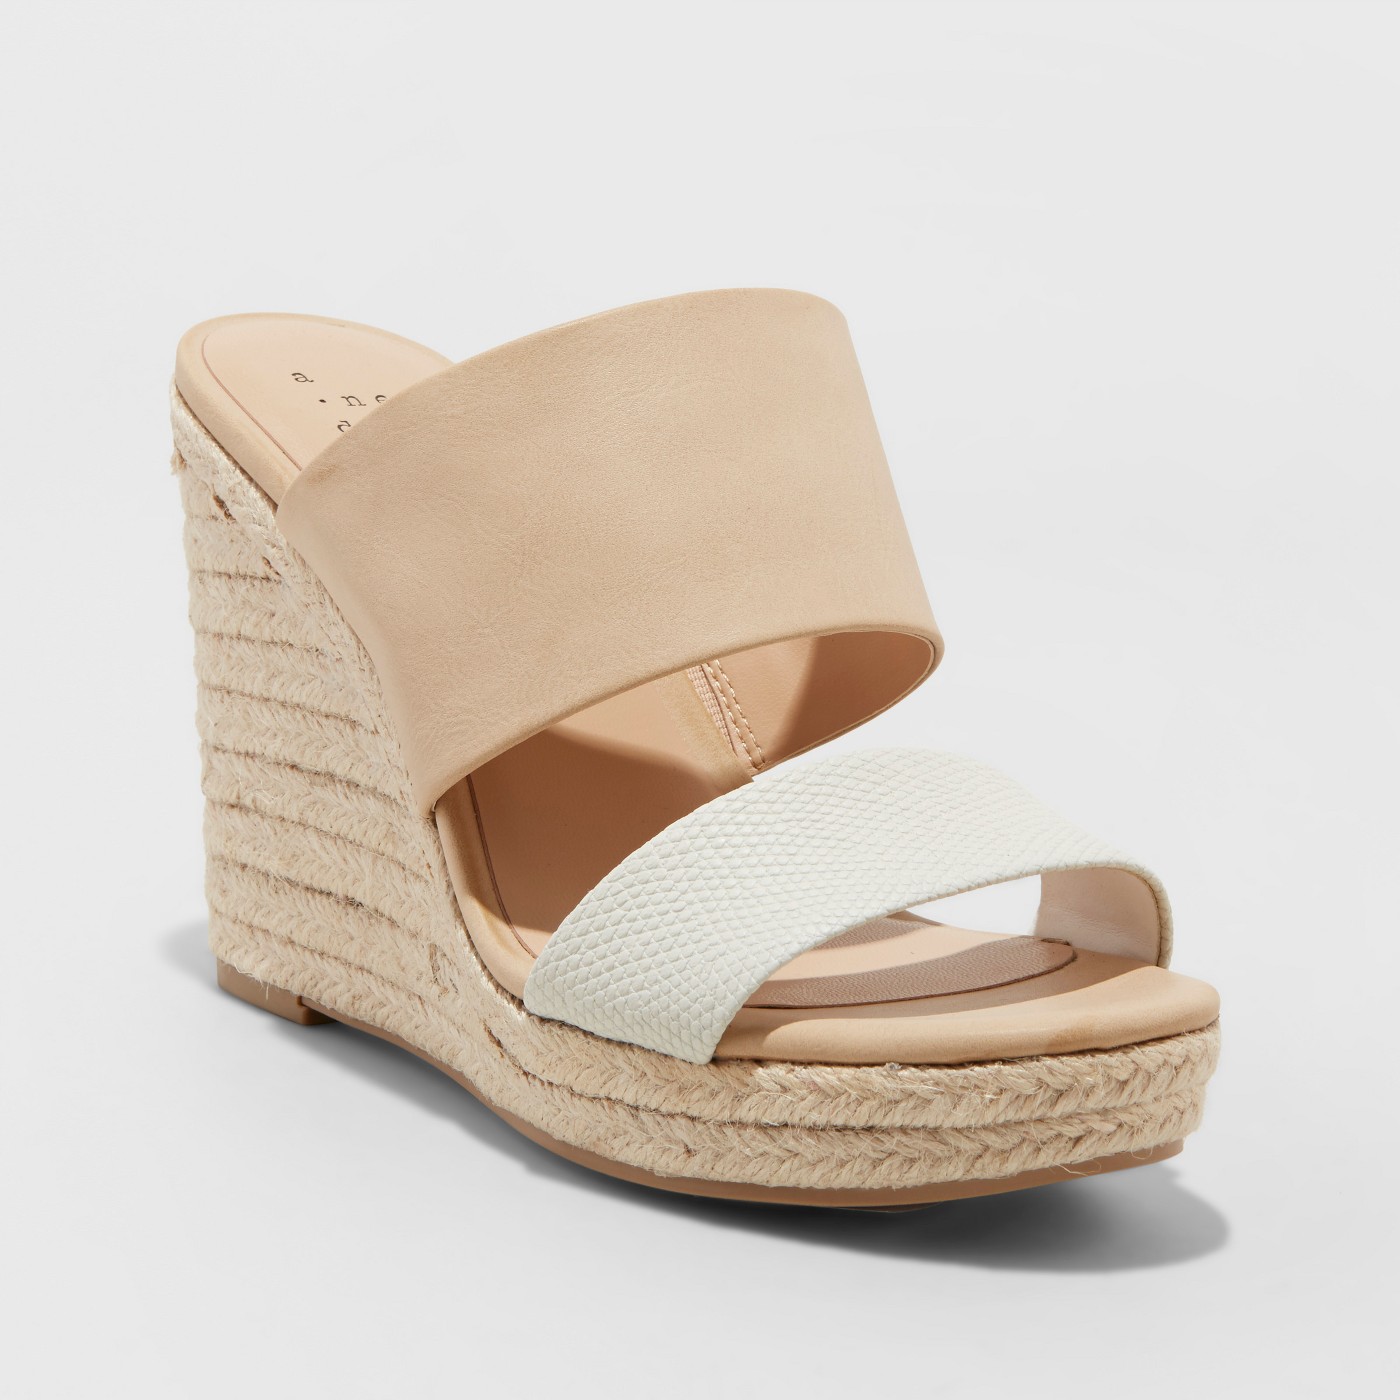 target wedge shoes